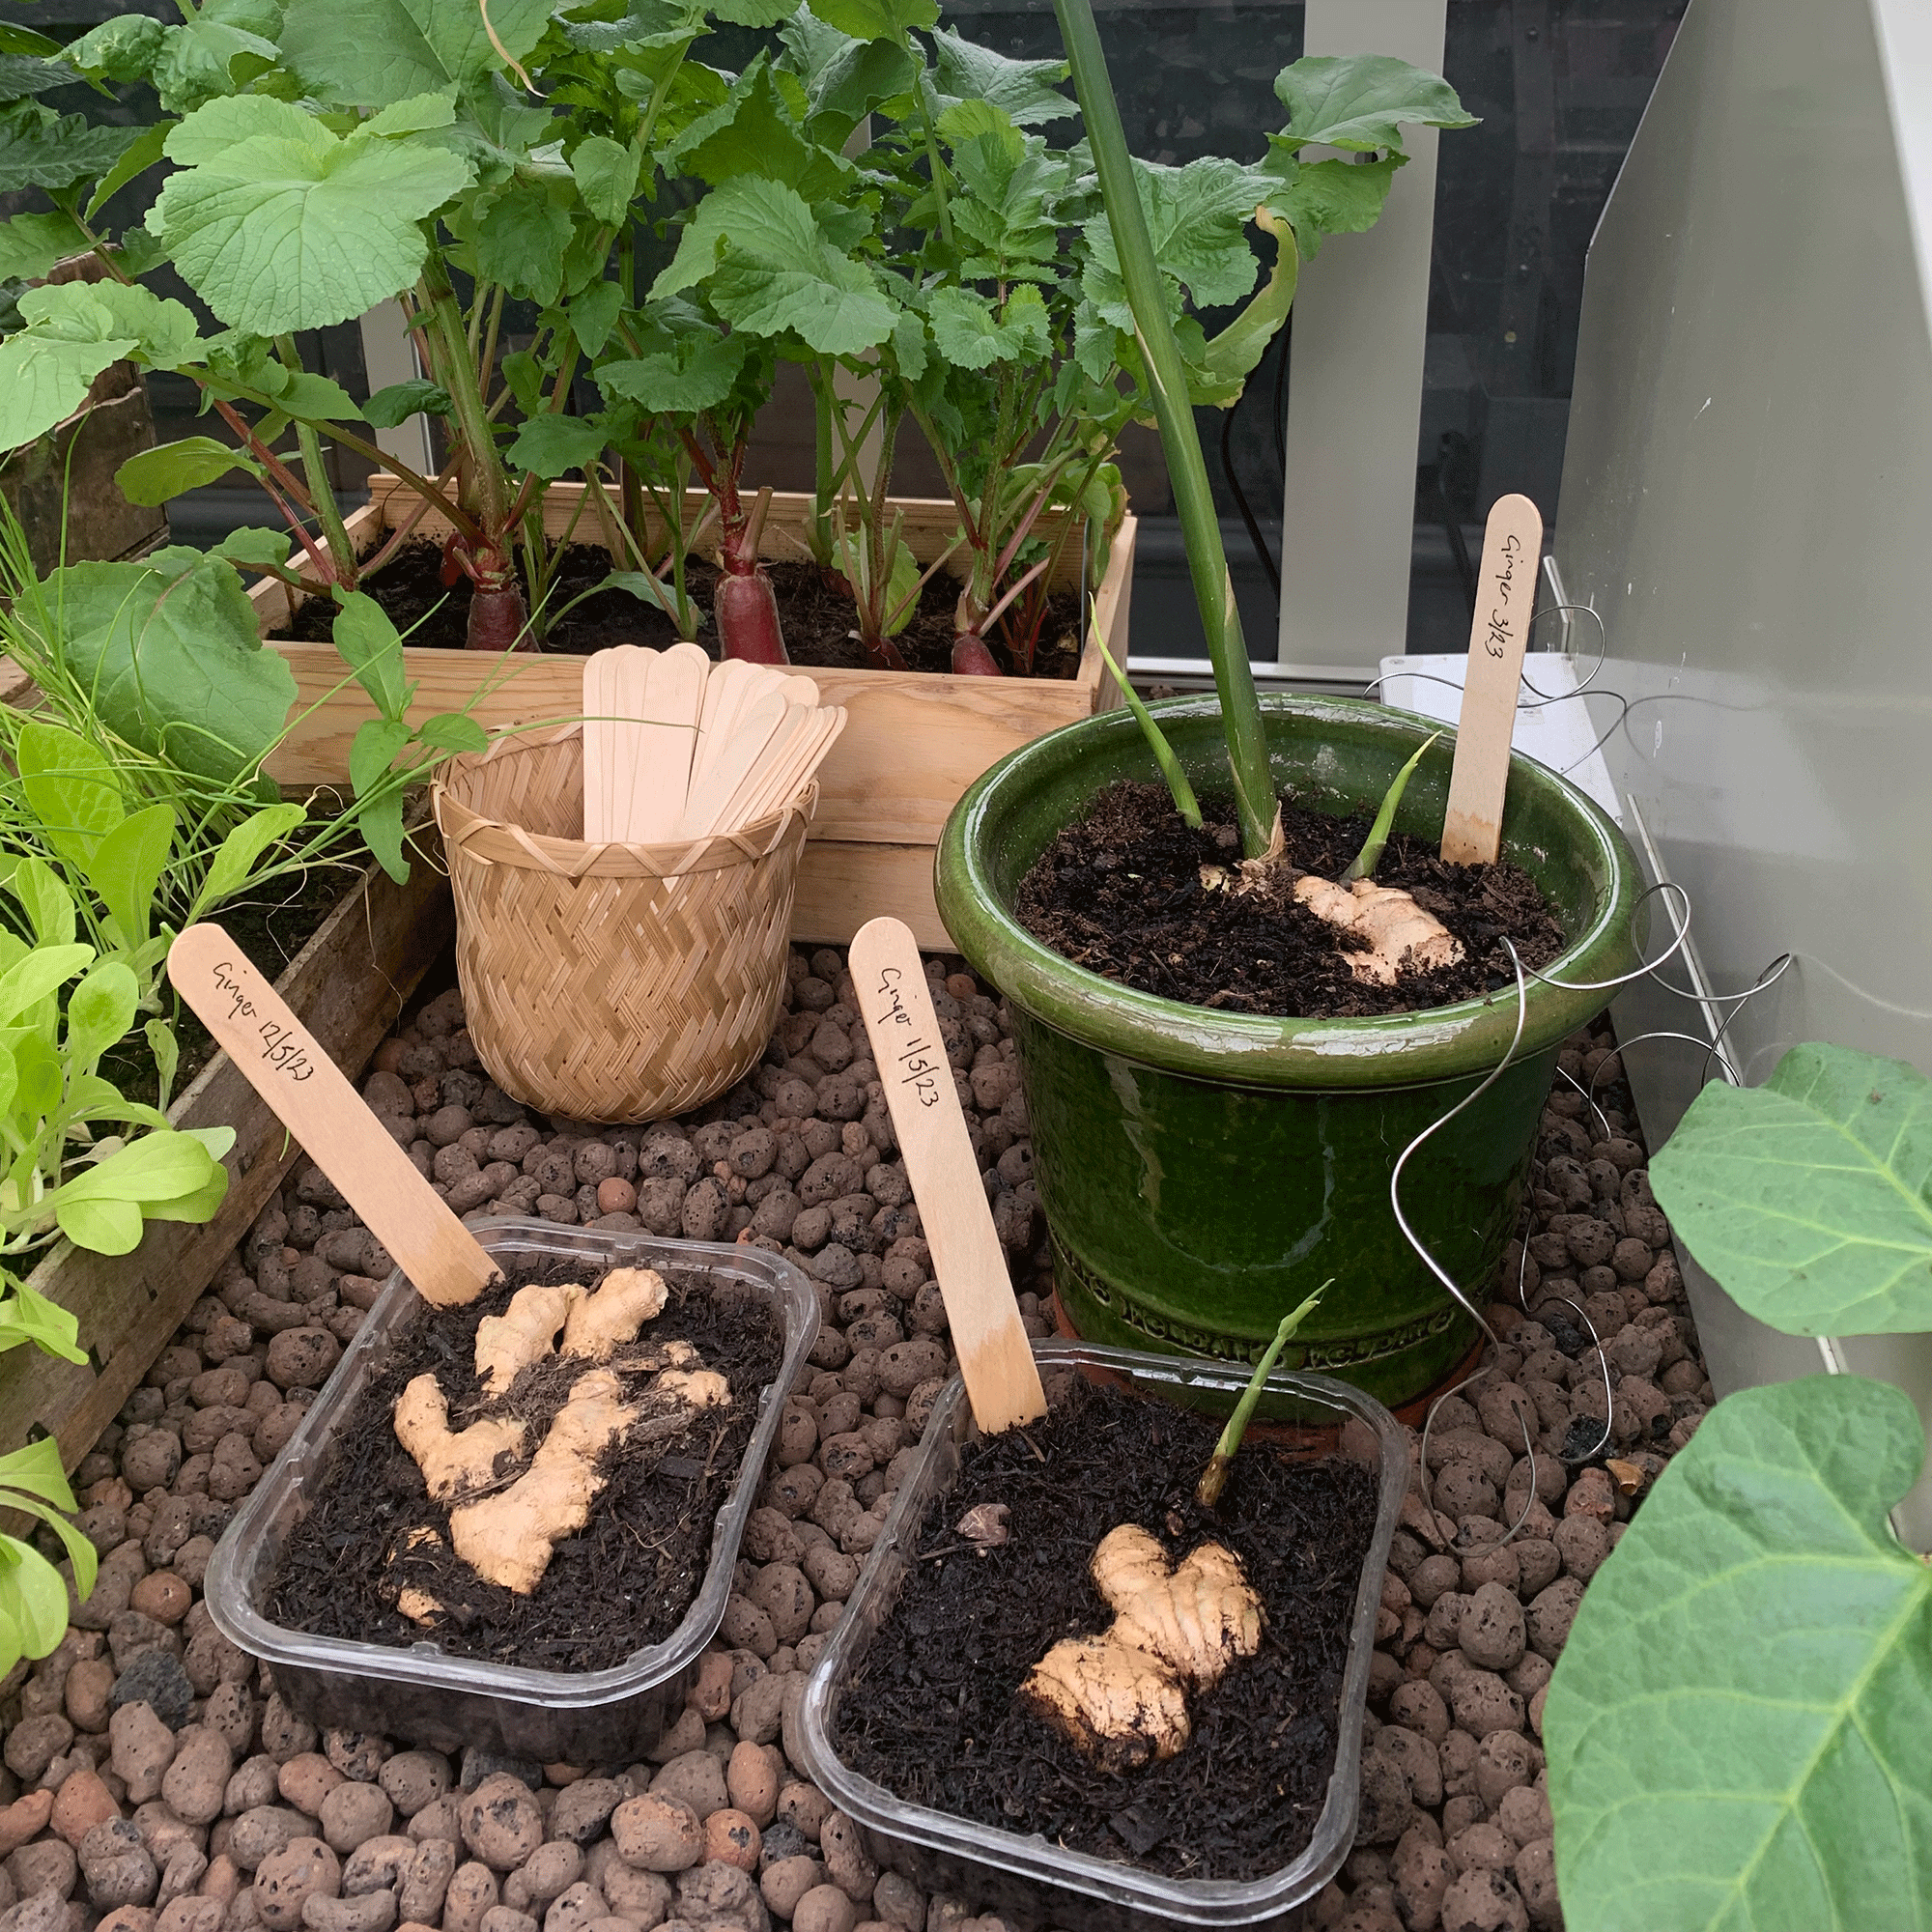 Ginger growing in a pot in a green house